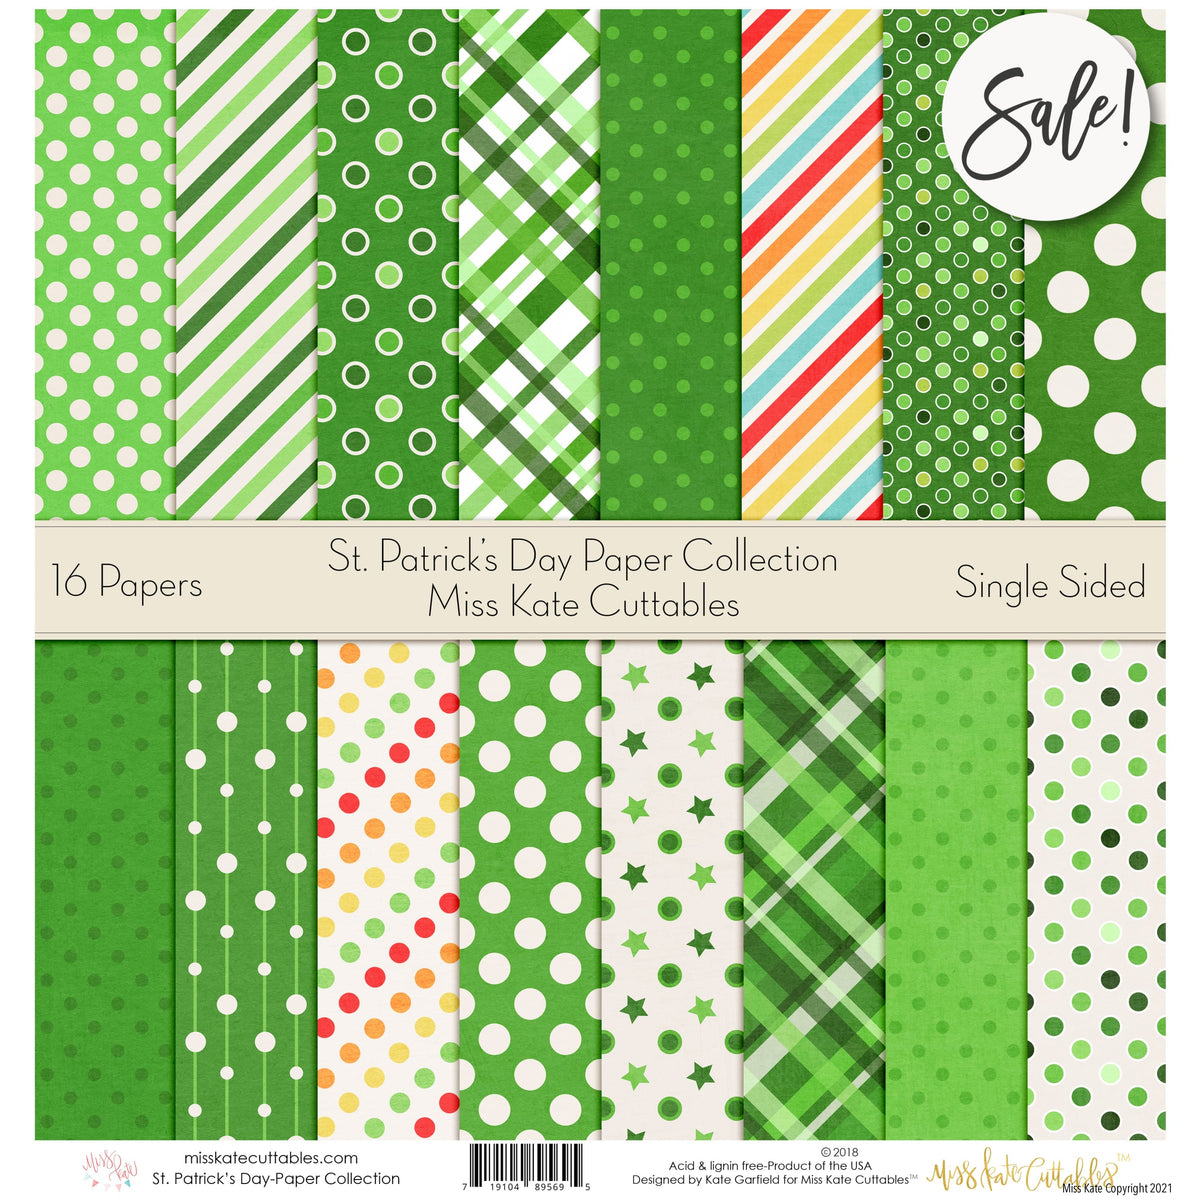 70pcs St. Patrick's Day Cardstock Thick Paper, Green Light Green